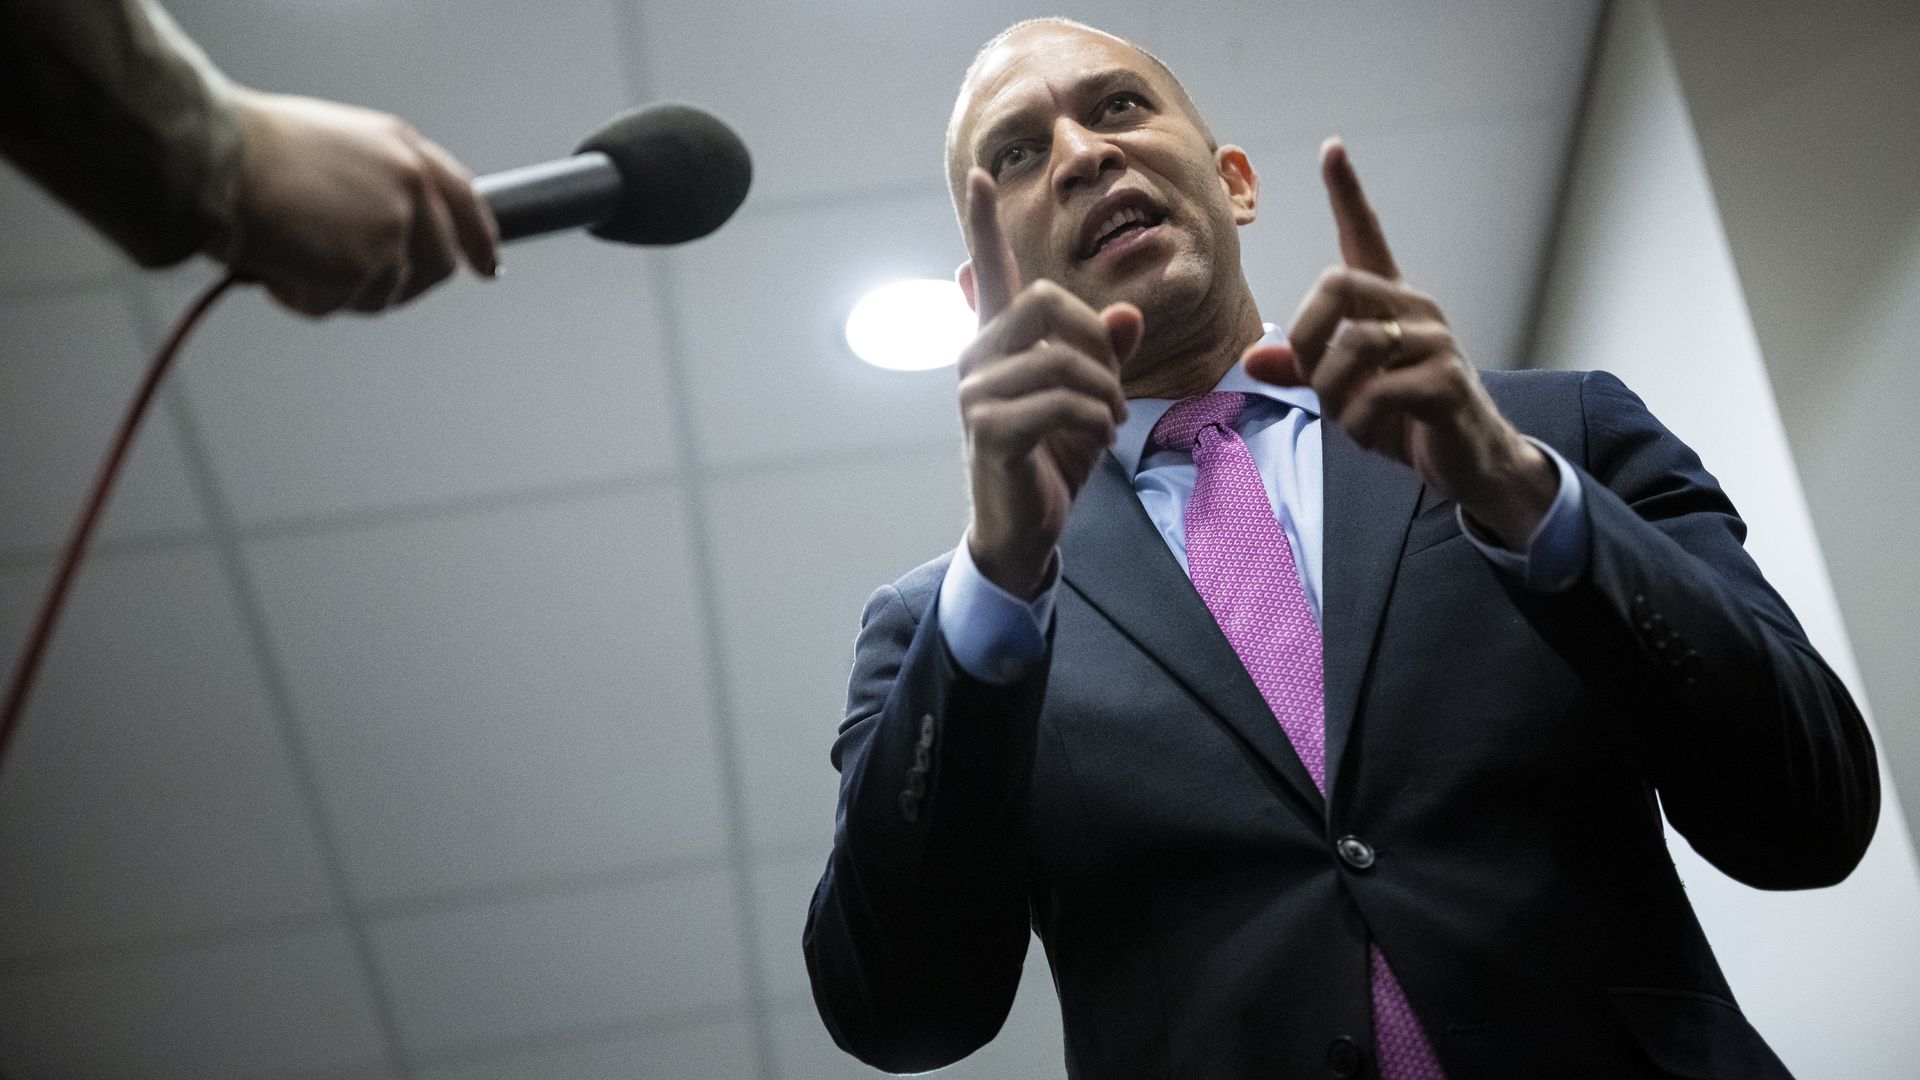 House Minority Leader Hakeem Jeffries, wearing a gray suit, blue shirt and purple tie, speaking into a microphone under a white ceiling.